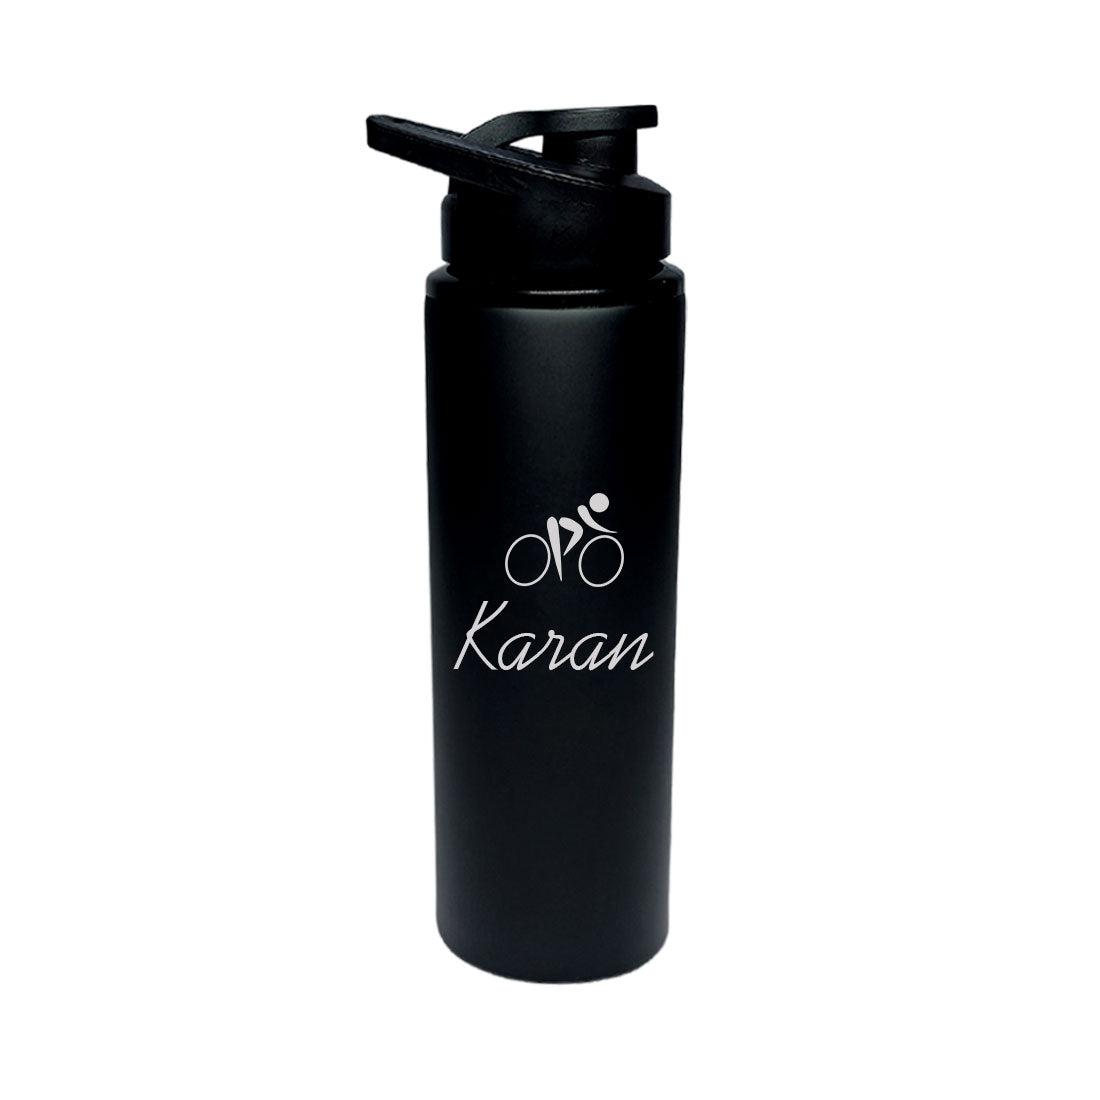 Personalized Engraved Water Bottles With Name Sipper Bottle for Cycling